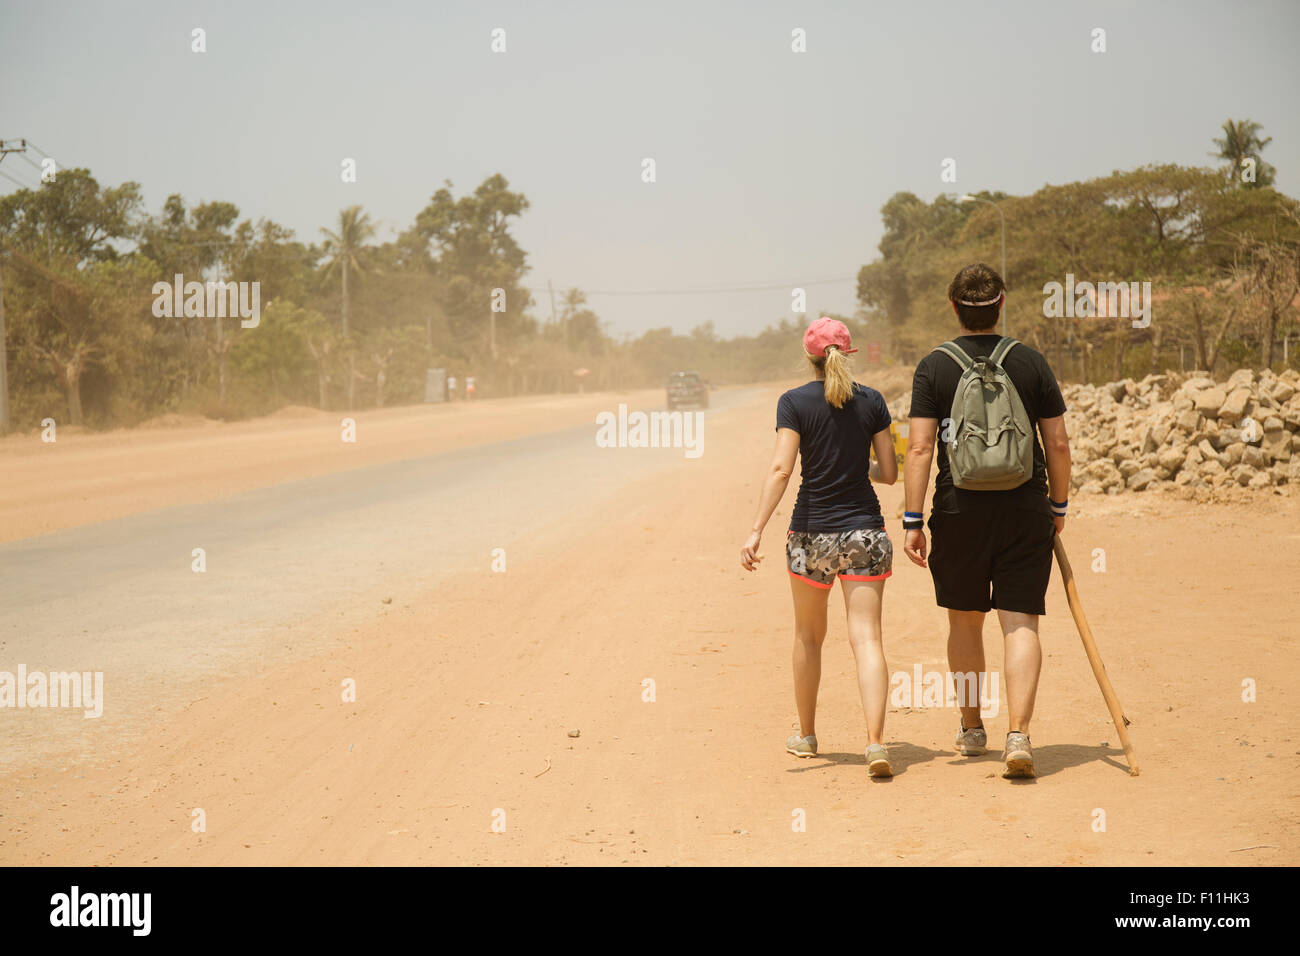 Caucasian couple walking on dirt road in remote field Stock Photo